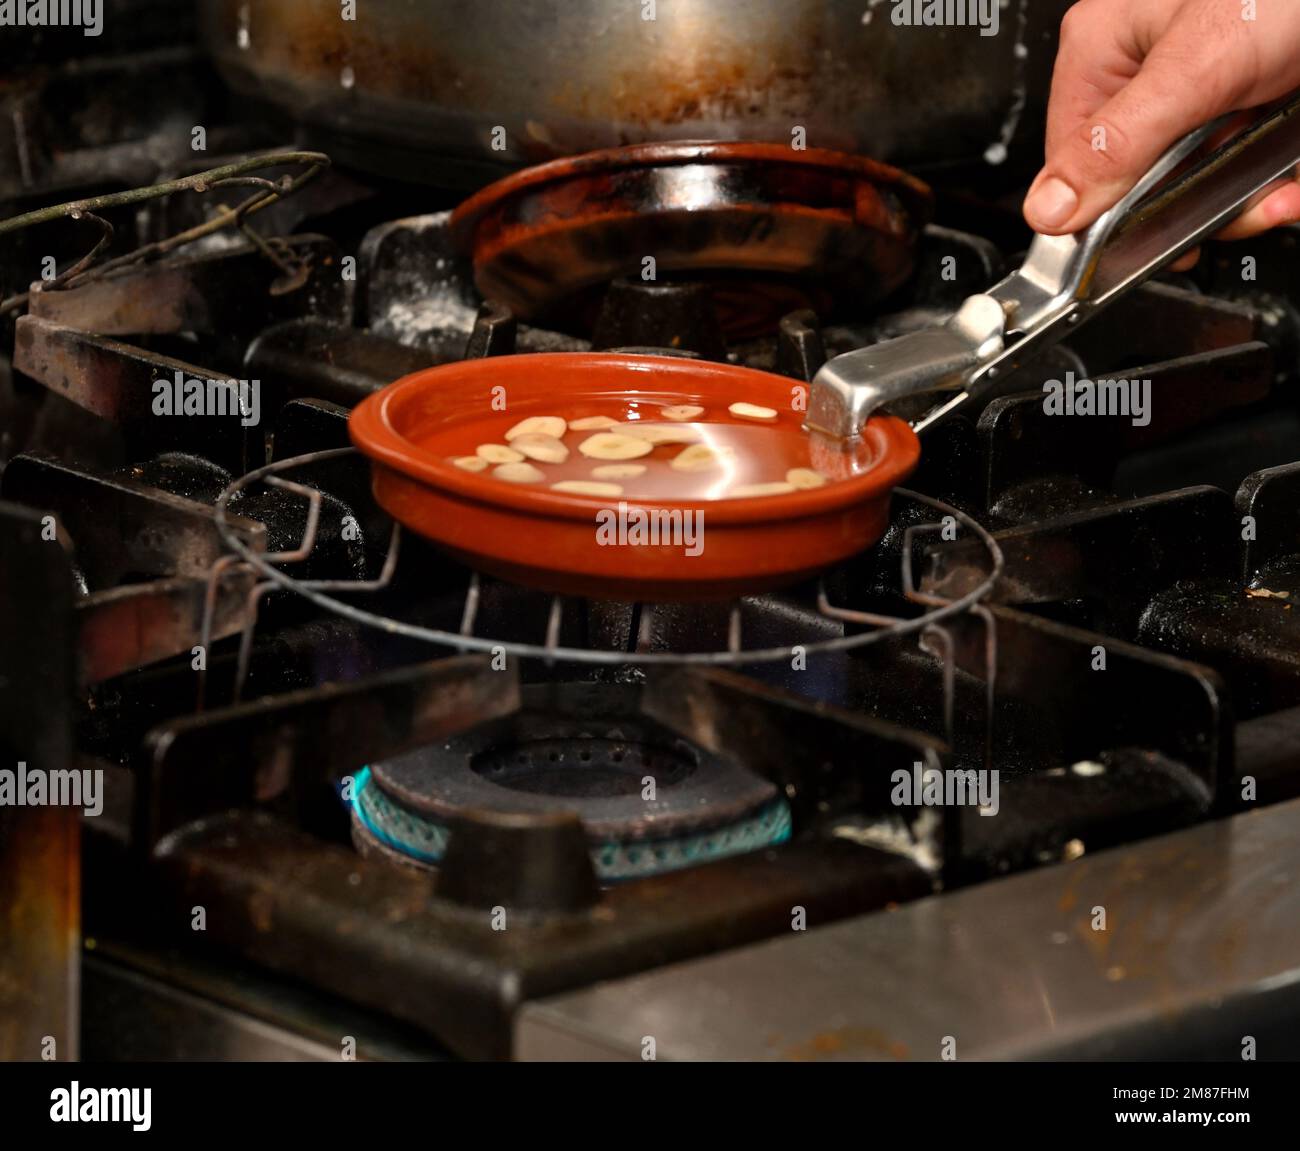 Heating oil for cooking on top of gas hob Stock Photo